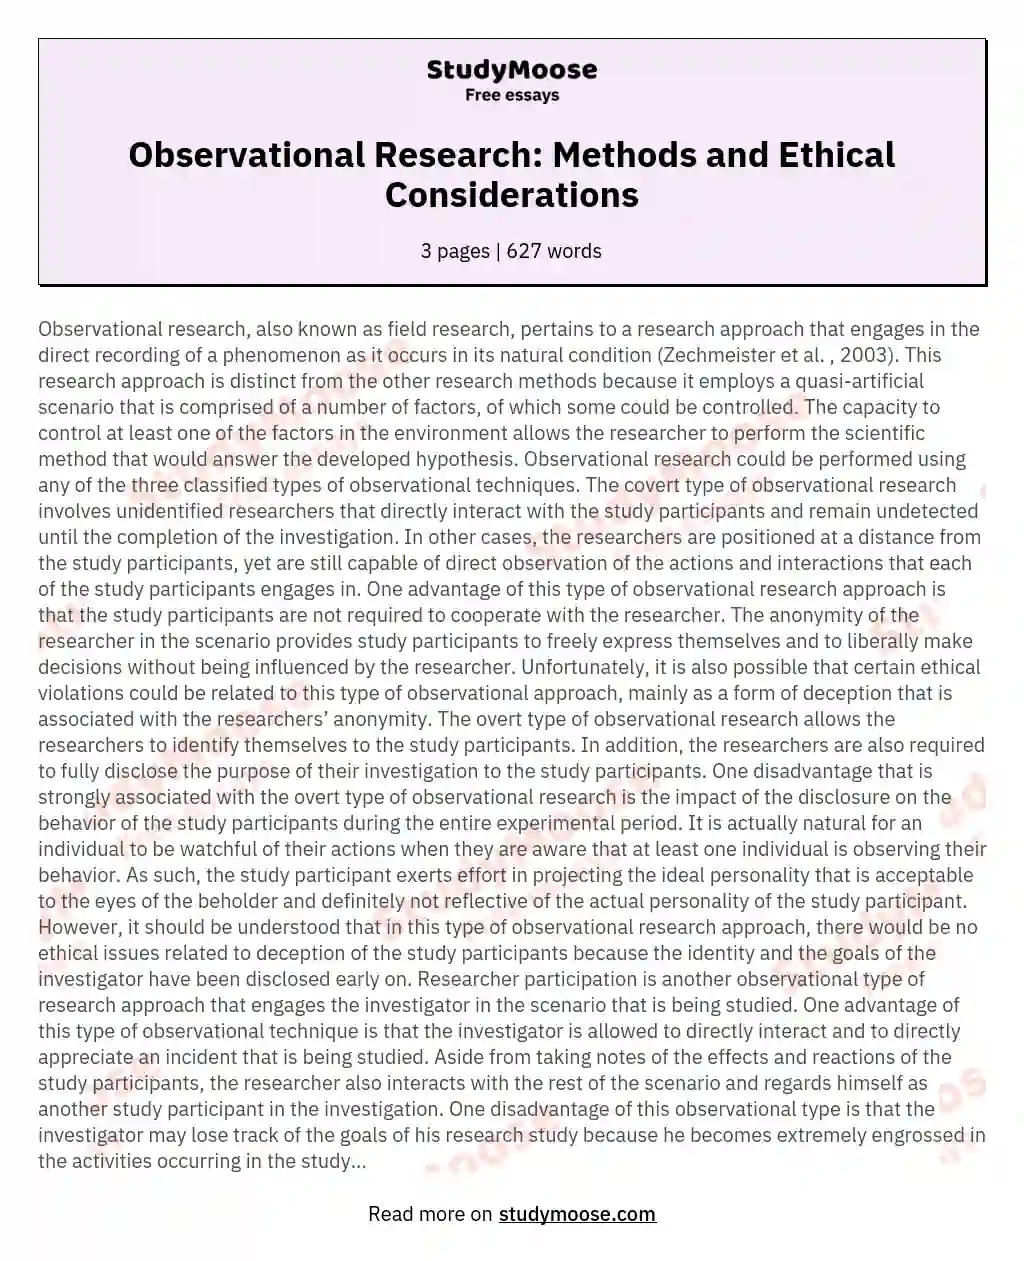 Observational Research: Methods and Ethical Considerations essay